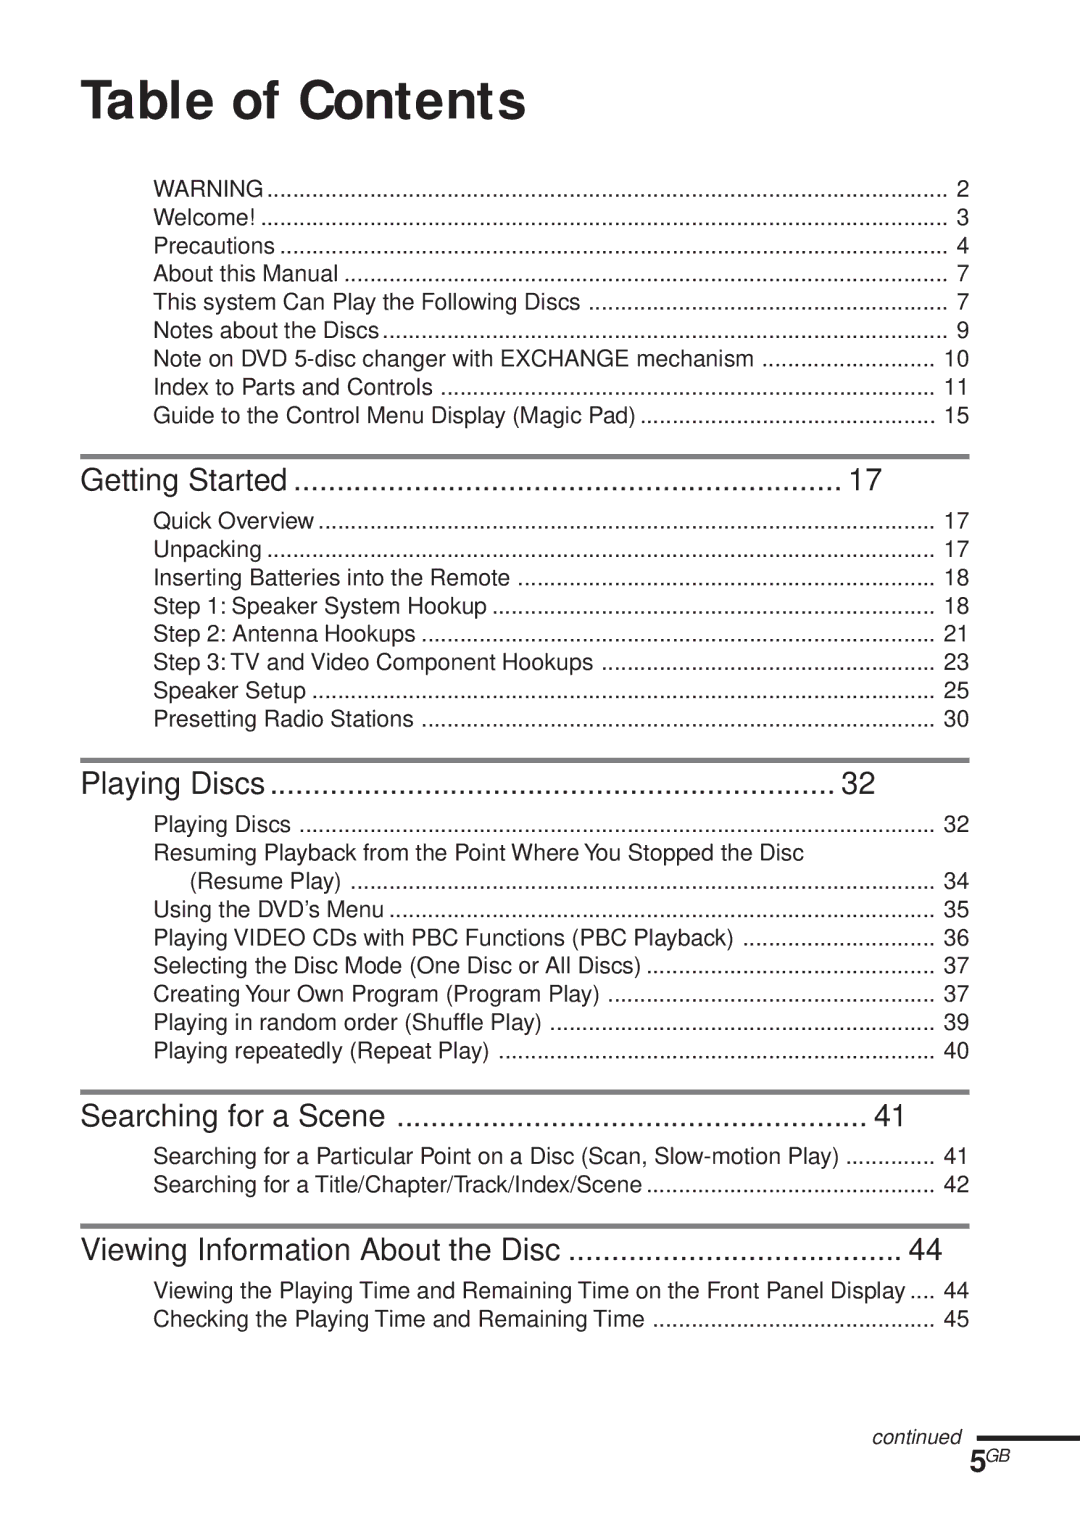 Sony DAV-C450 manual Table of Contents 